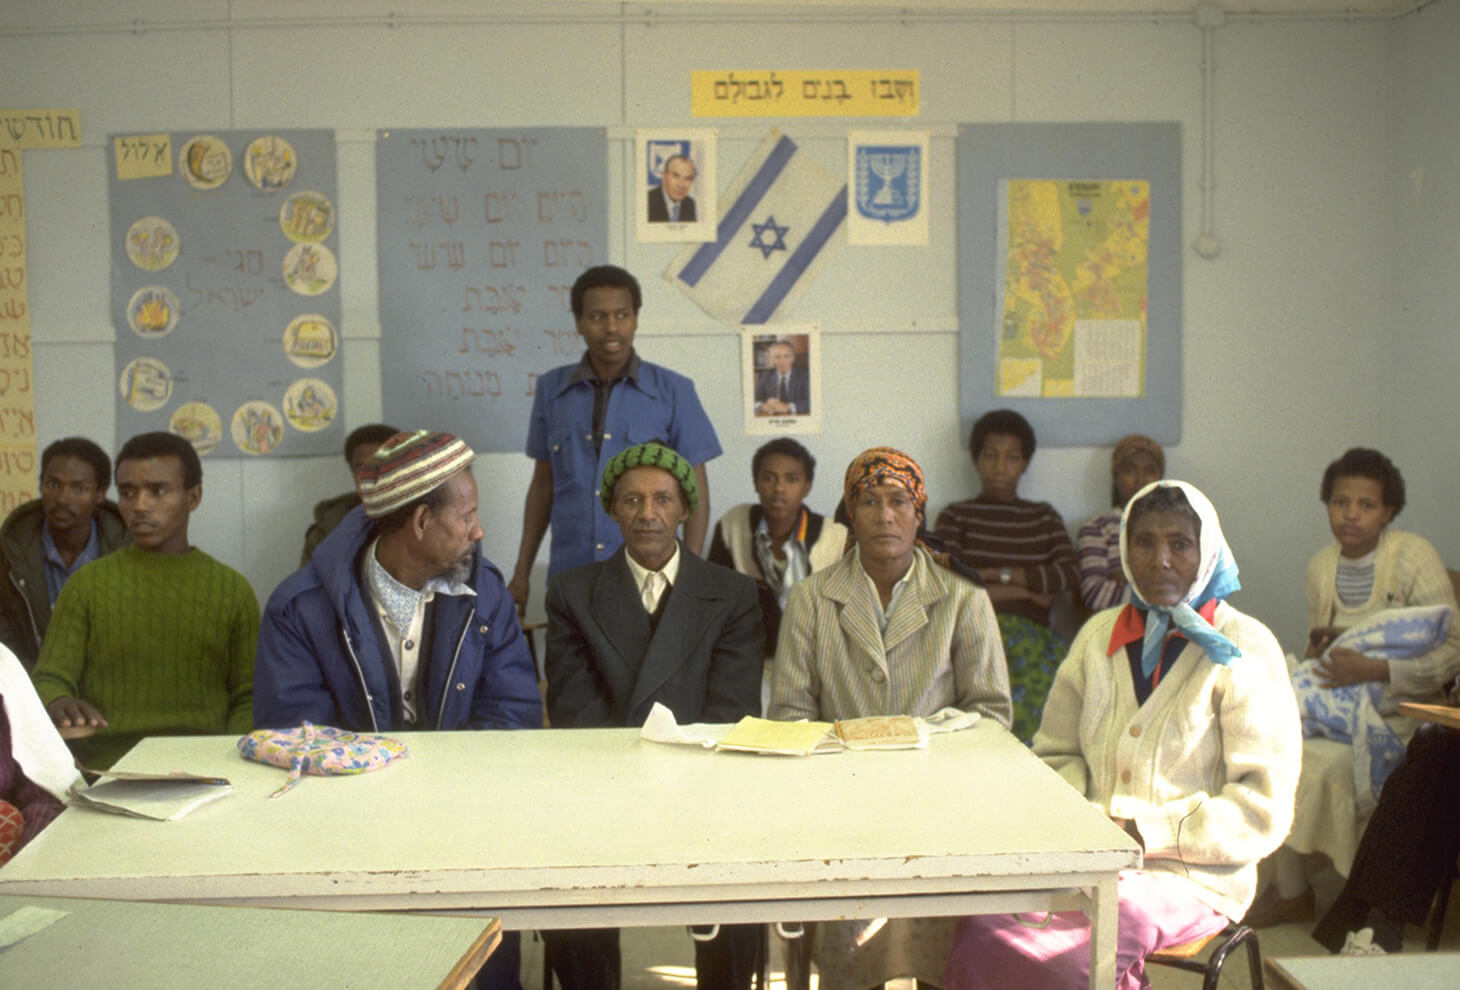 NEW ETHIOPIAN IMMIGRANTS LEARNING HEBREW IN A CLASS AT THE ASHKELON ABSORPTION CENTER. Photo: Nati Harnik, GPO